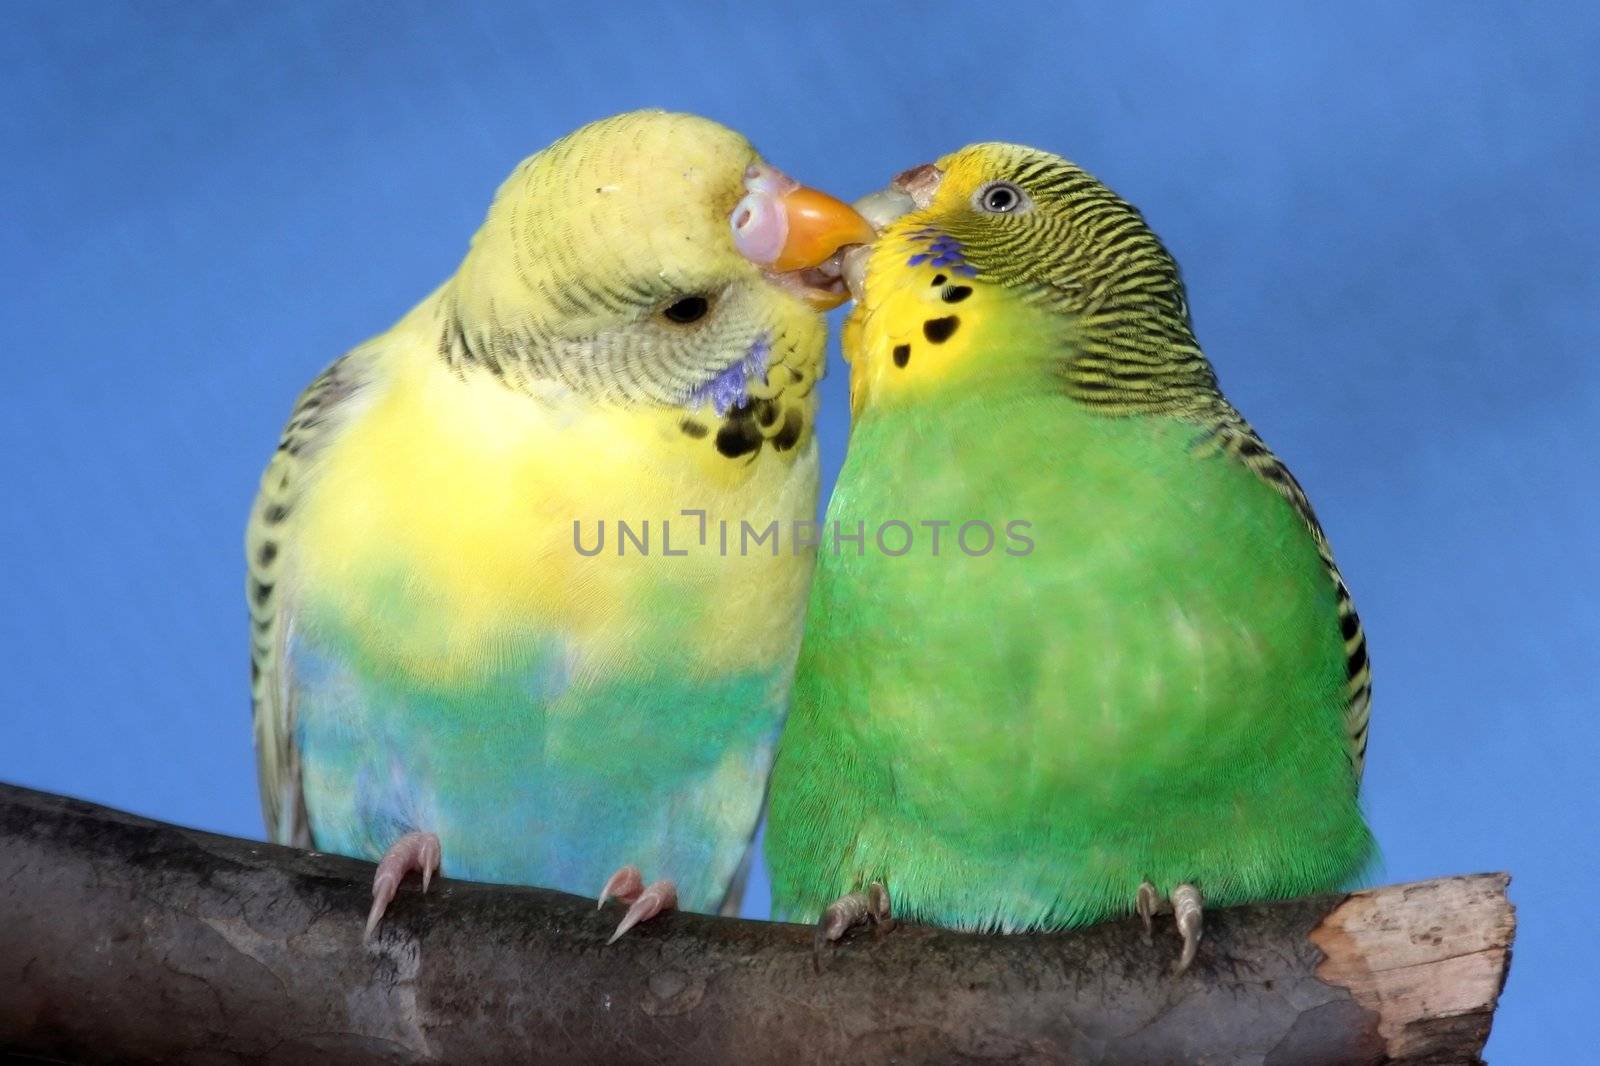 Breeding pair of budgies with the male budgie bird kissing his mate